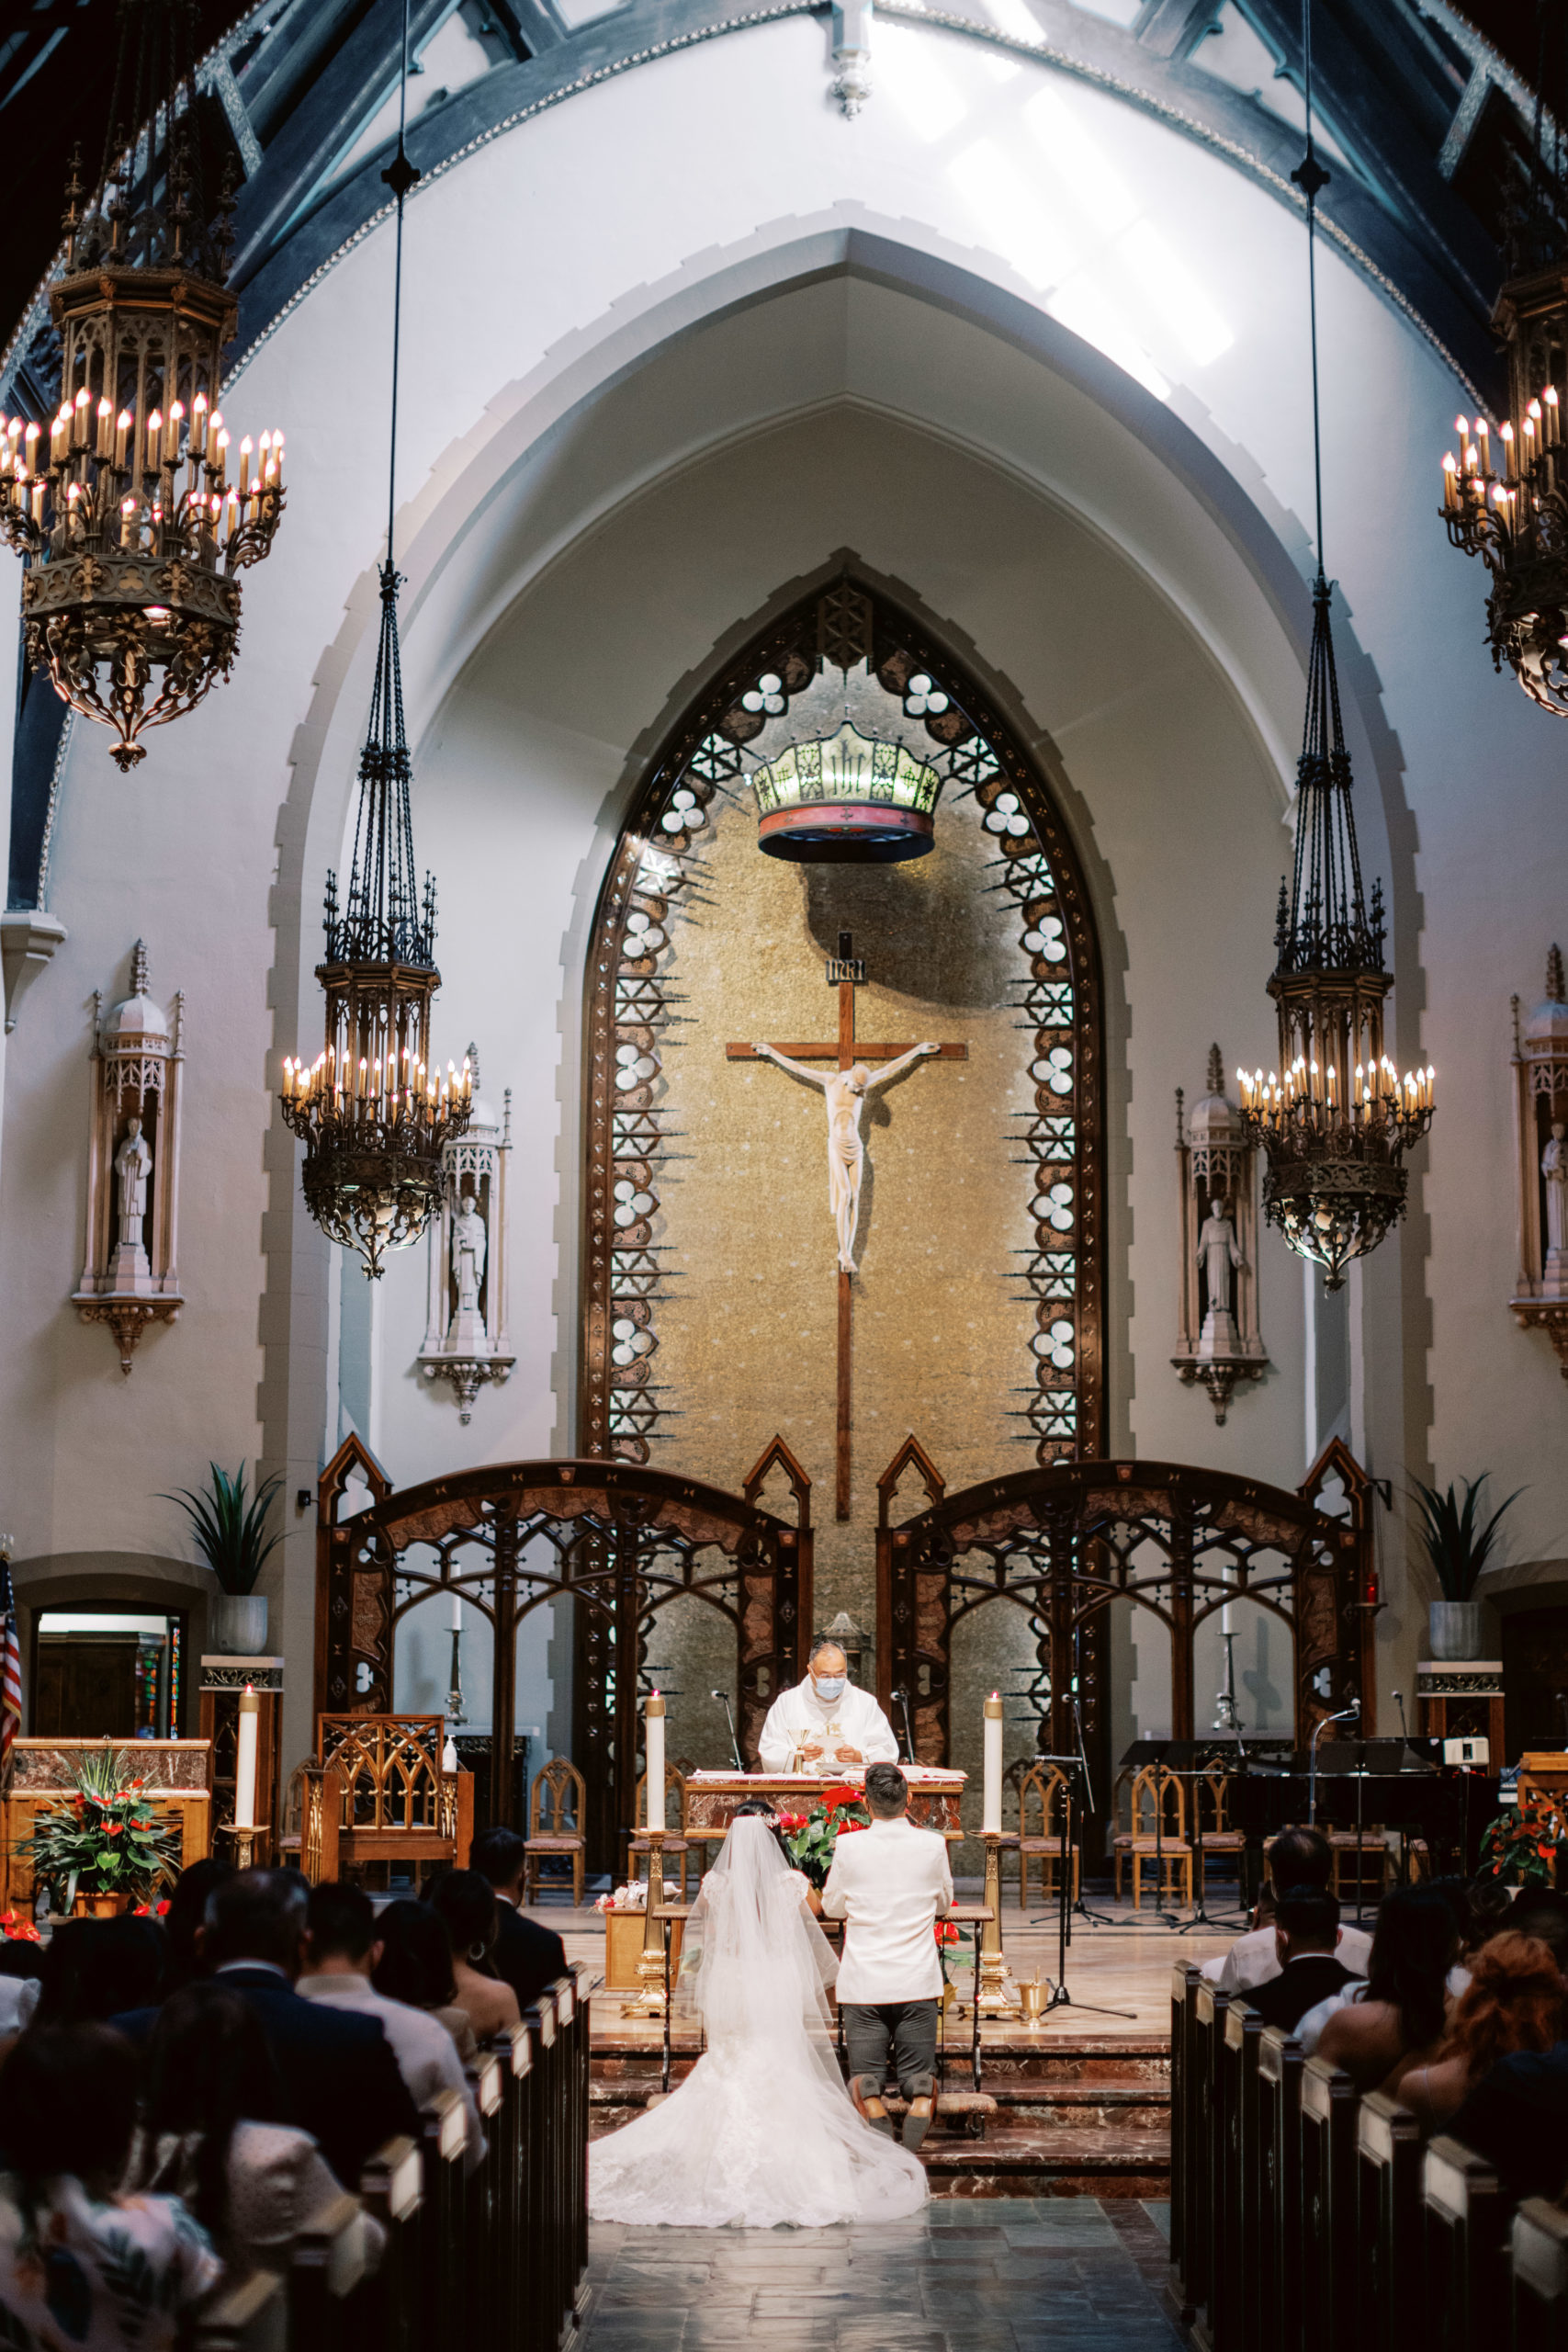 bride and groom kneeling at altar in Catholic Church wedding ceremony